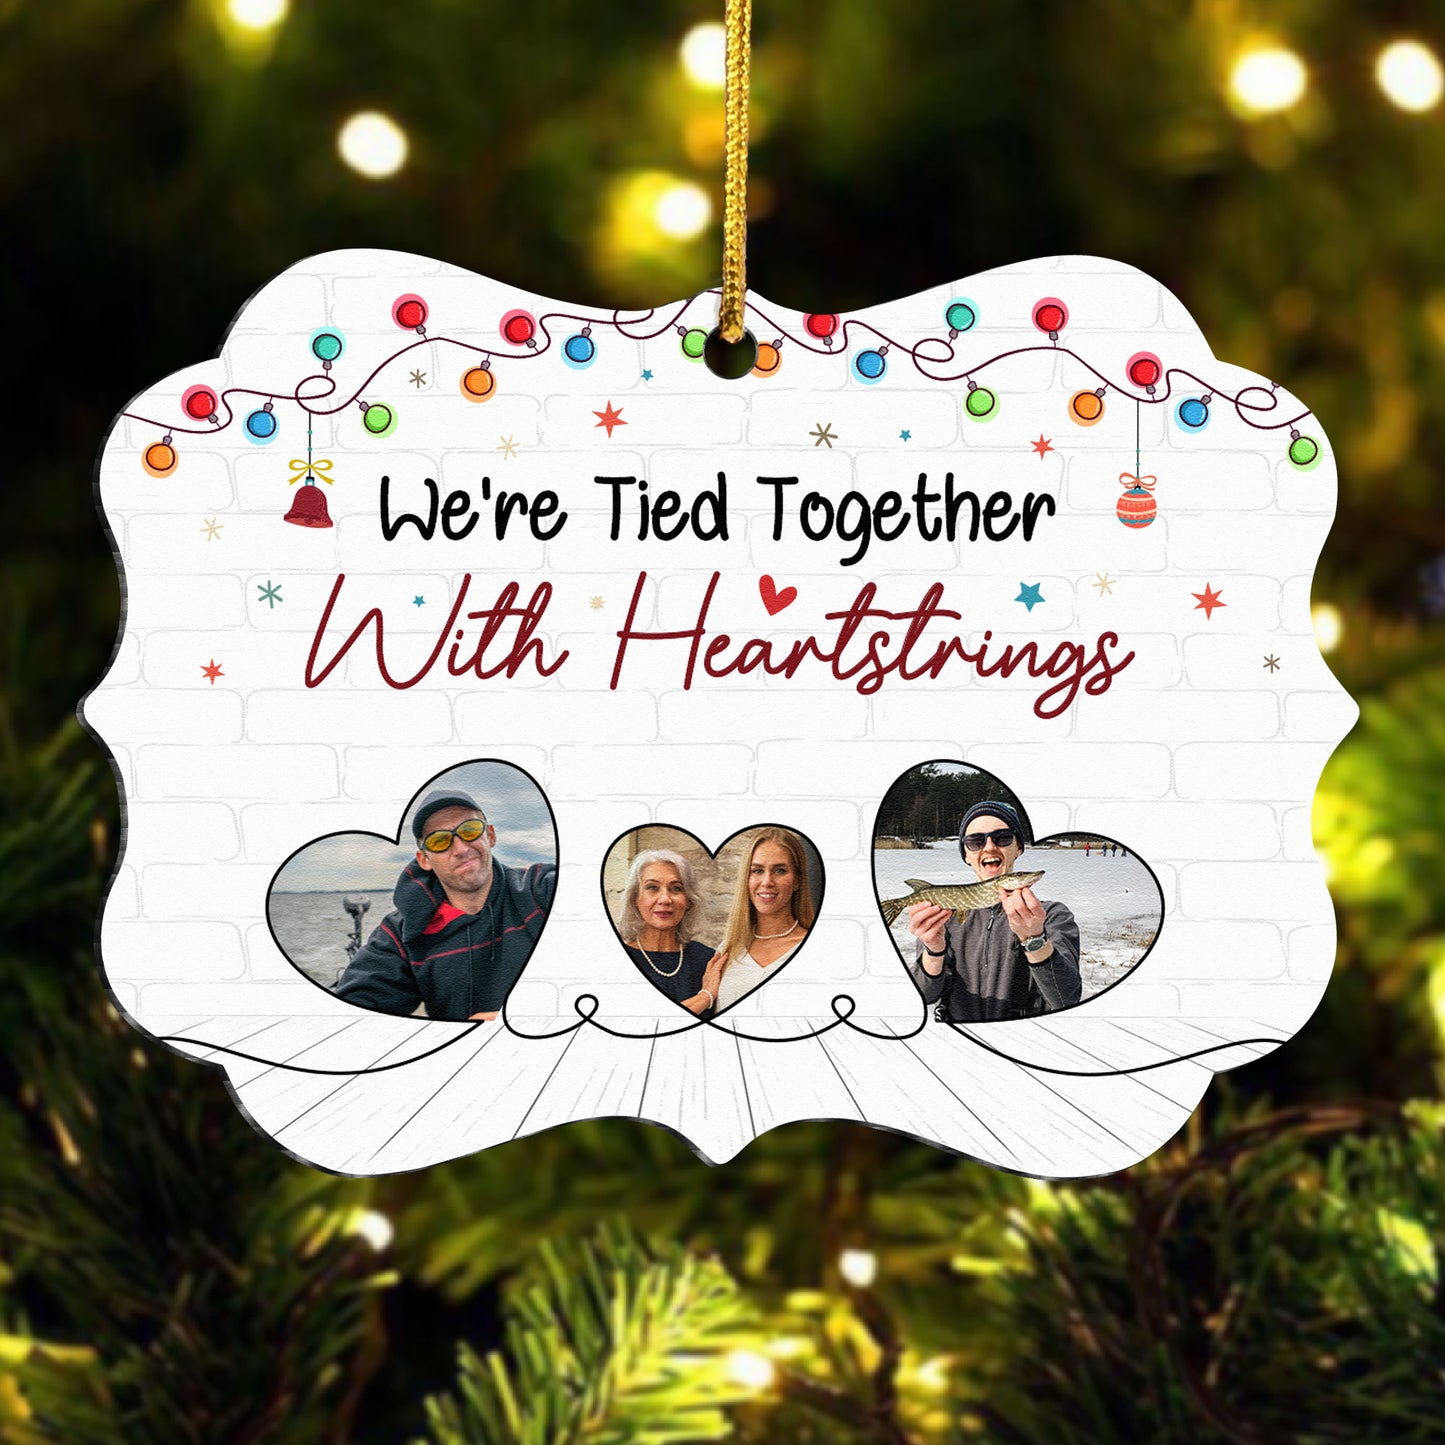 Tied Together With Heartstrings - Personalized Aluminum Photo Ornament